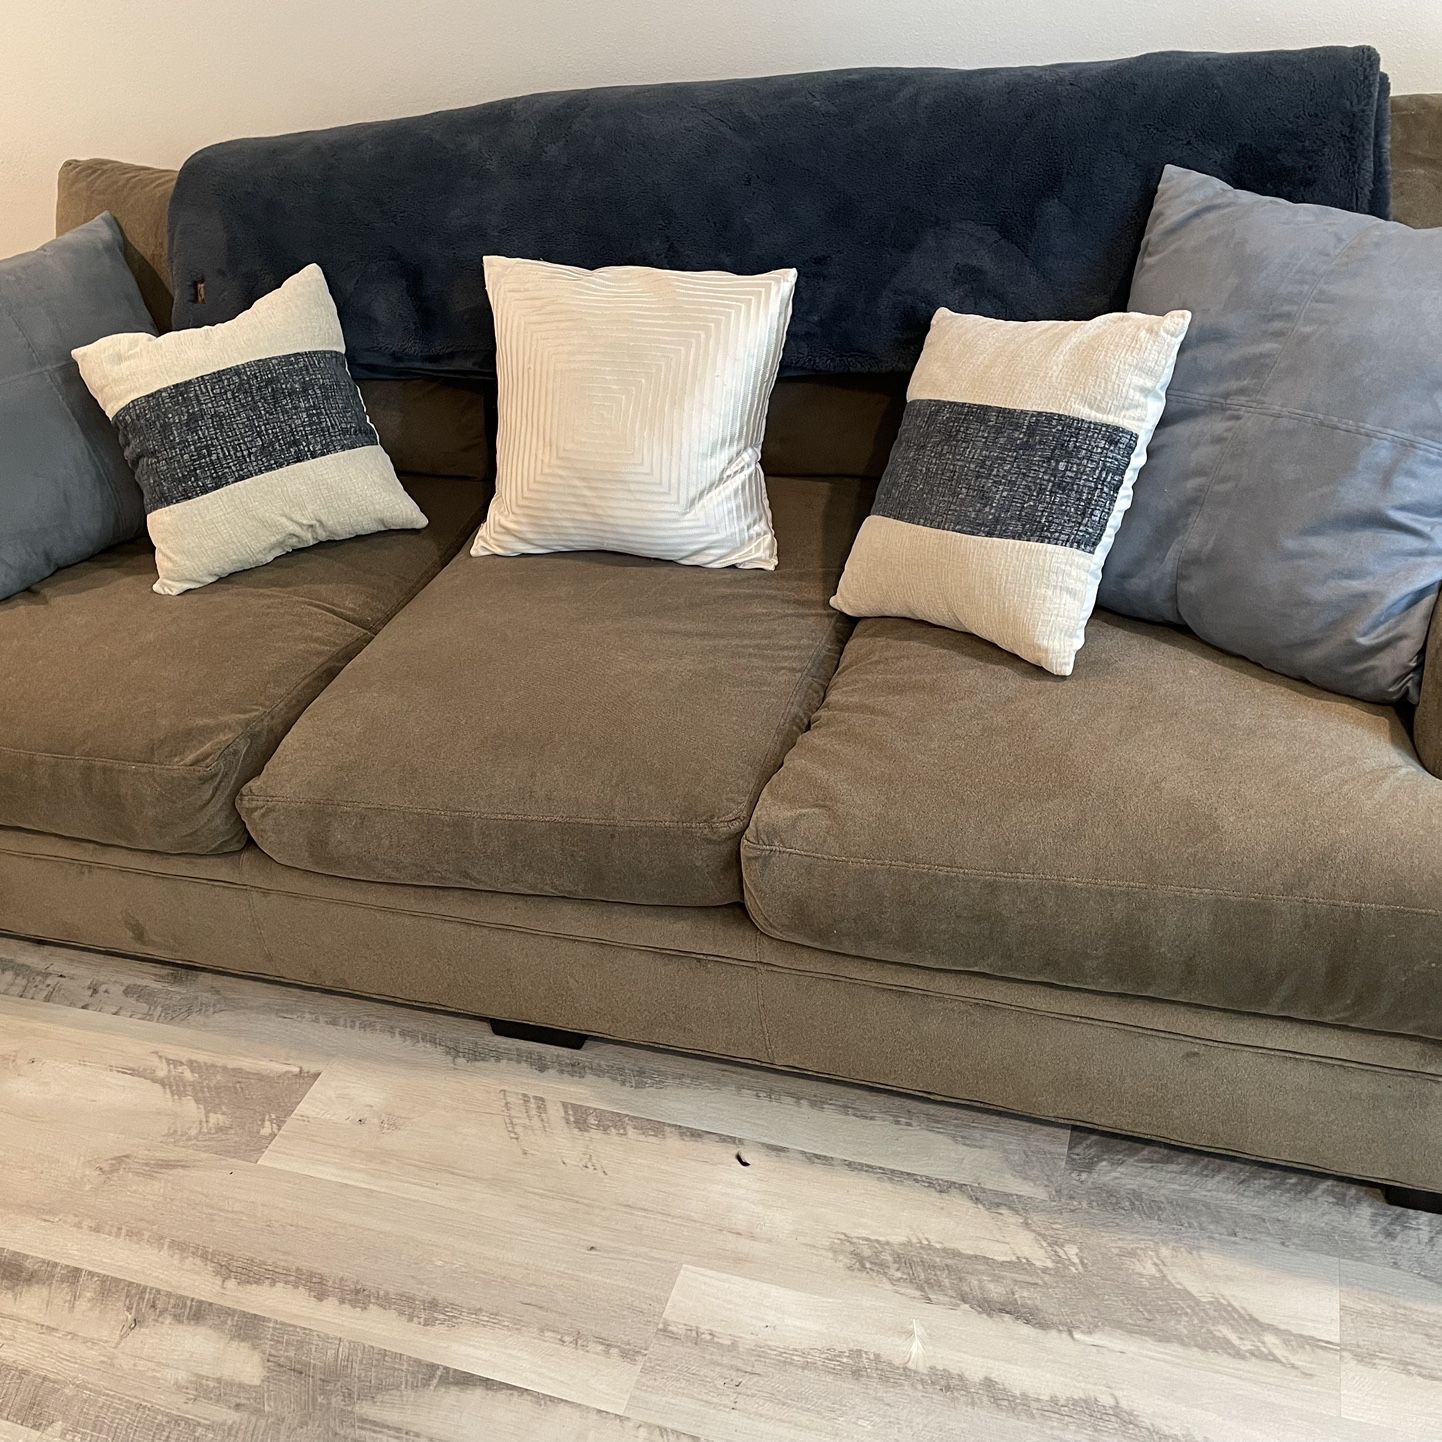 Comfortable Living Room Couch